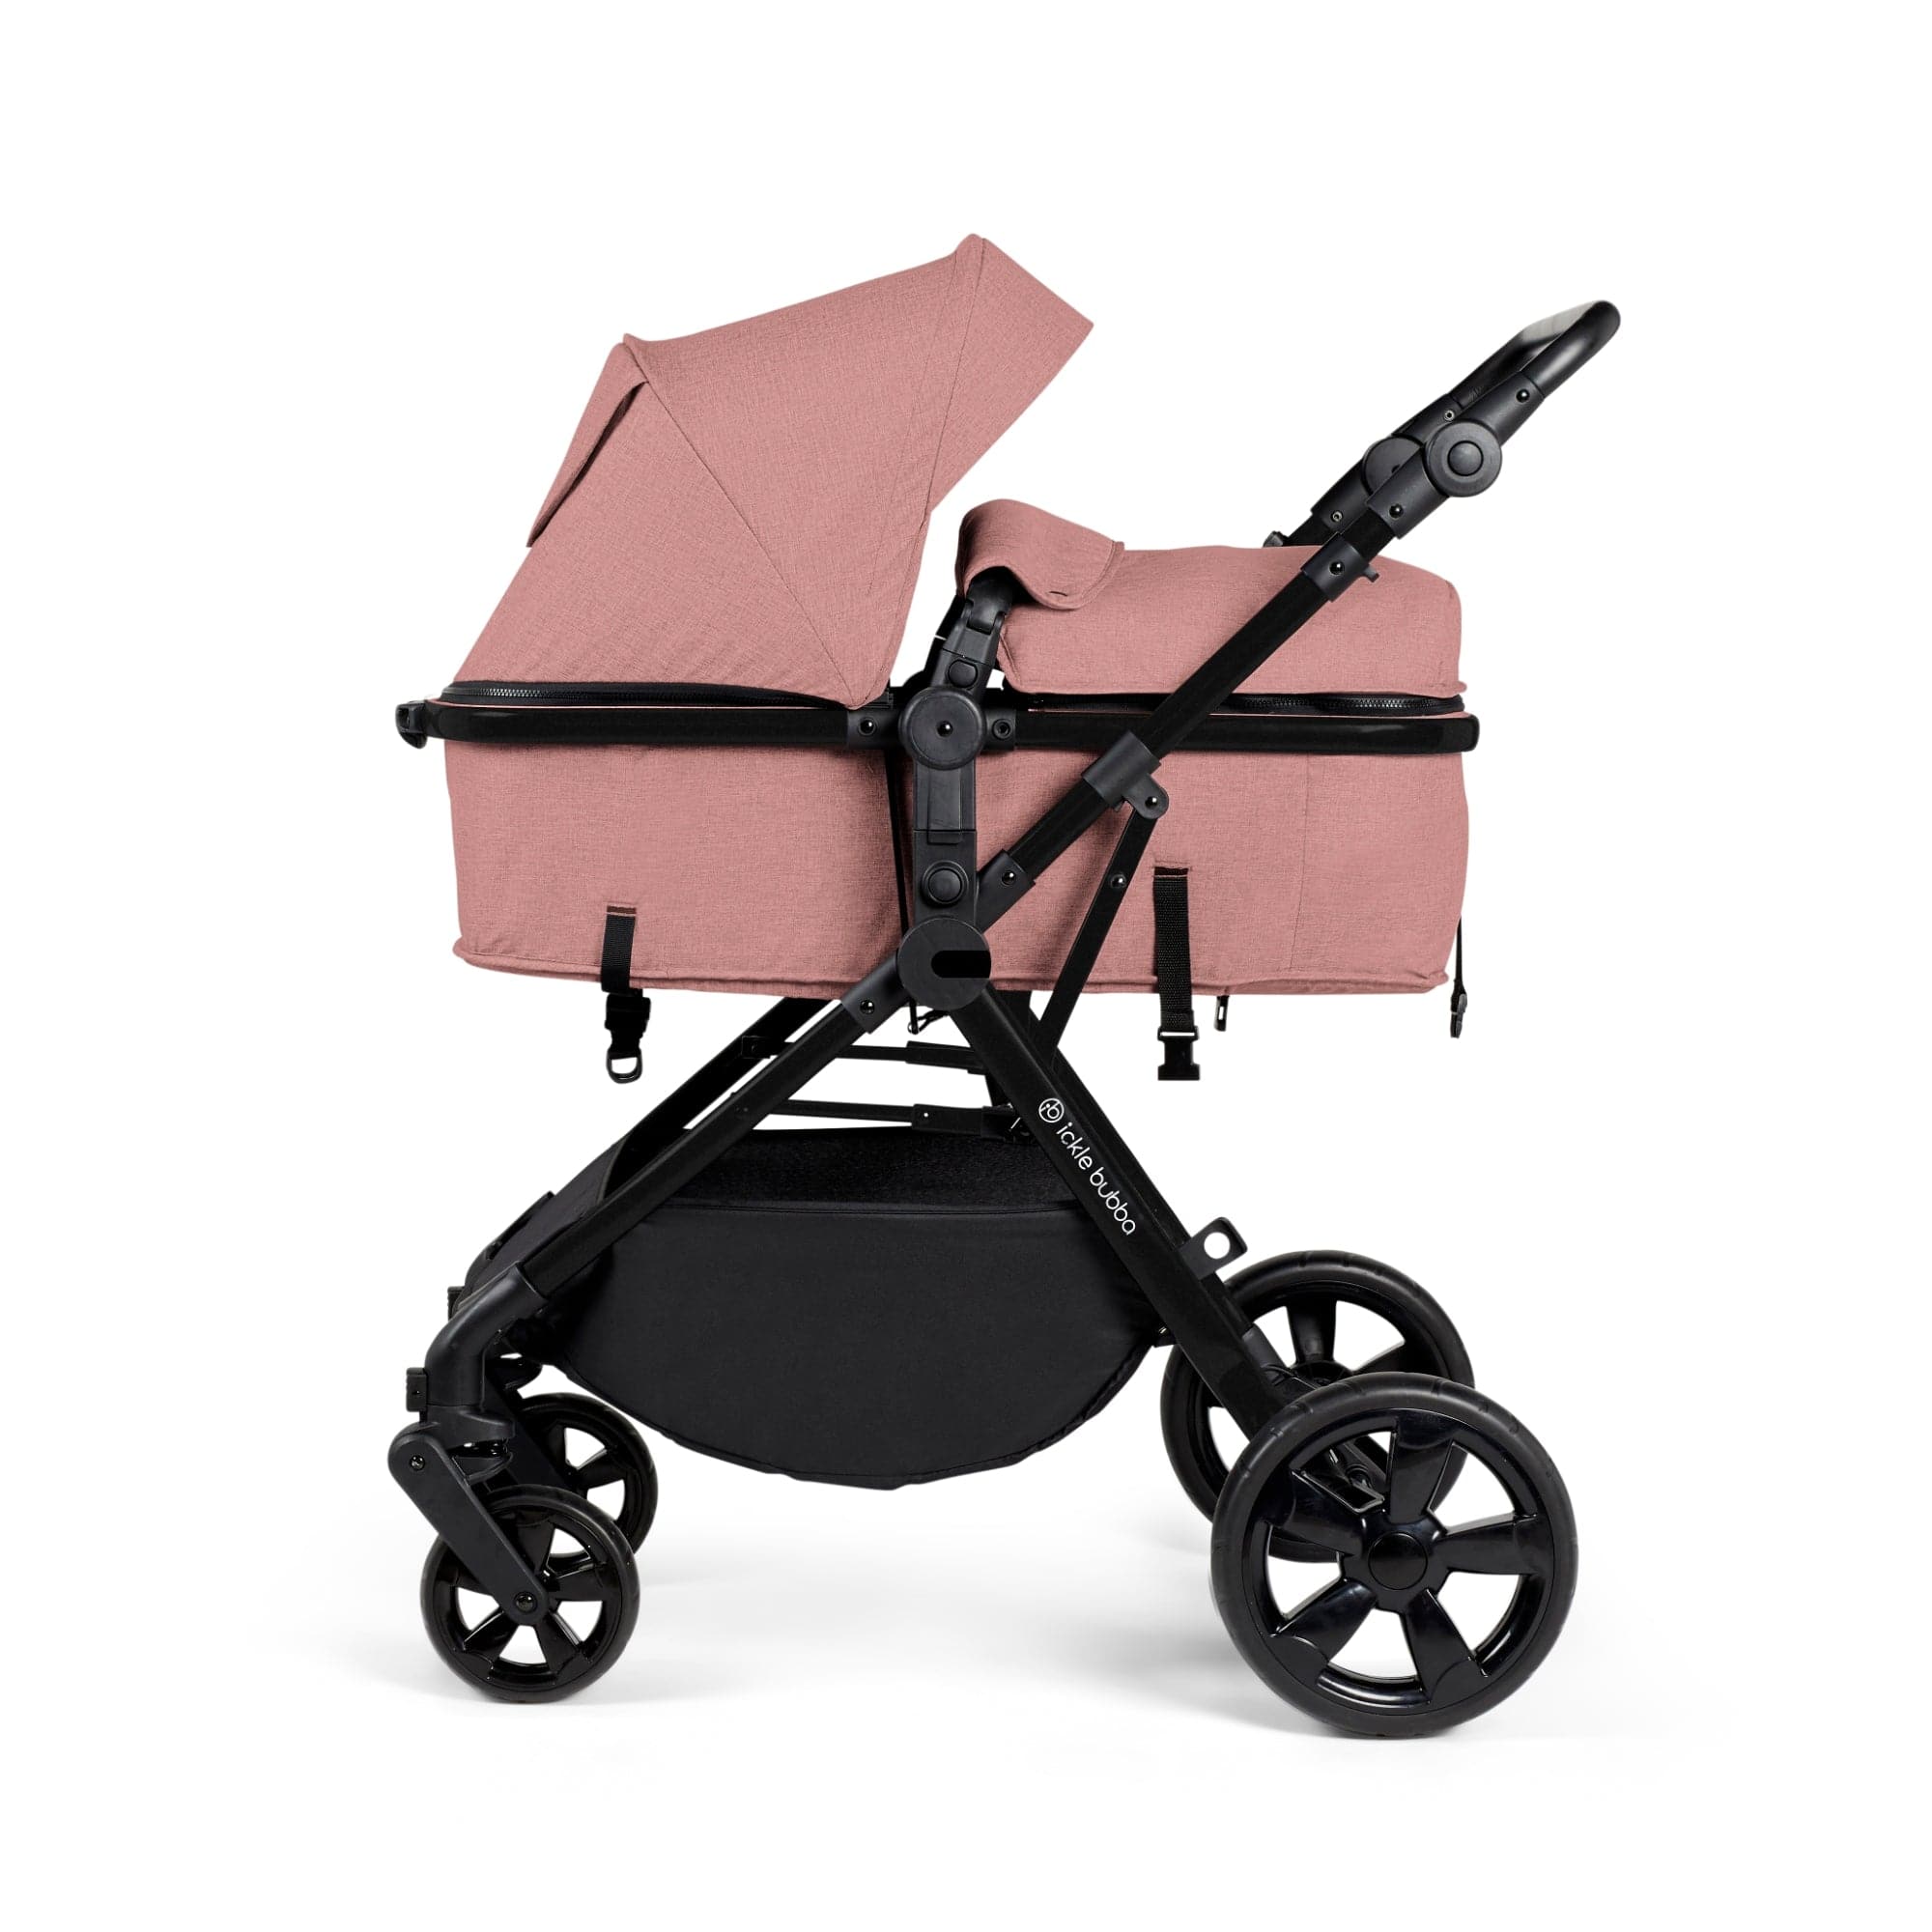 Ickle Bubba Comet I-Size Travel System With Stratus Car Seat & Isofix Base- Dusky Pink - For Your Little One